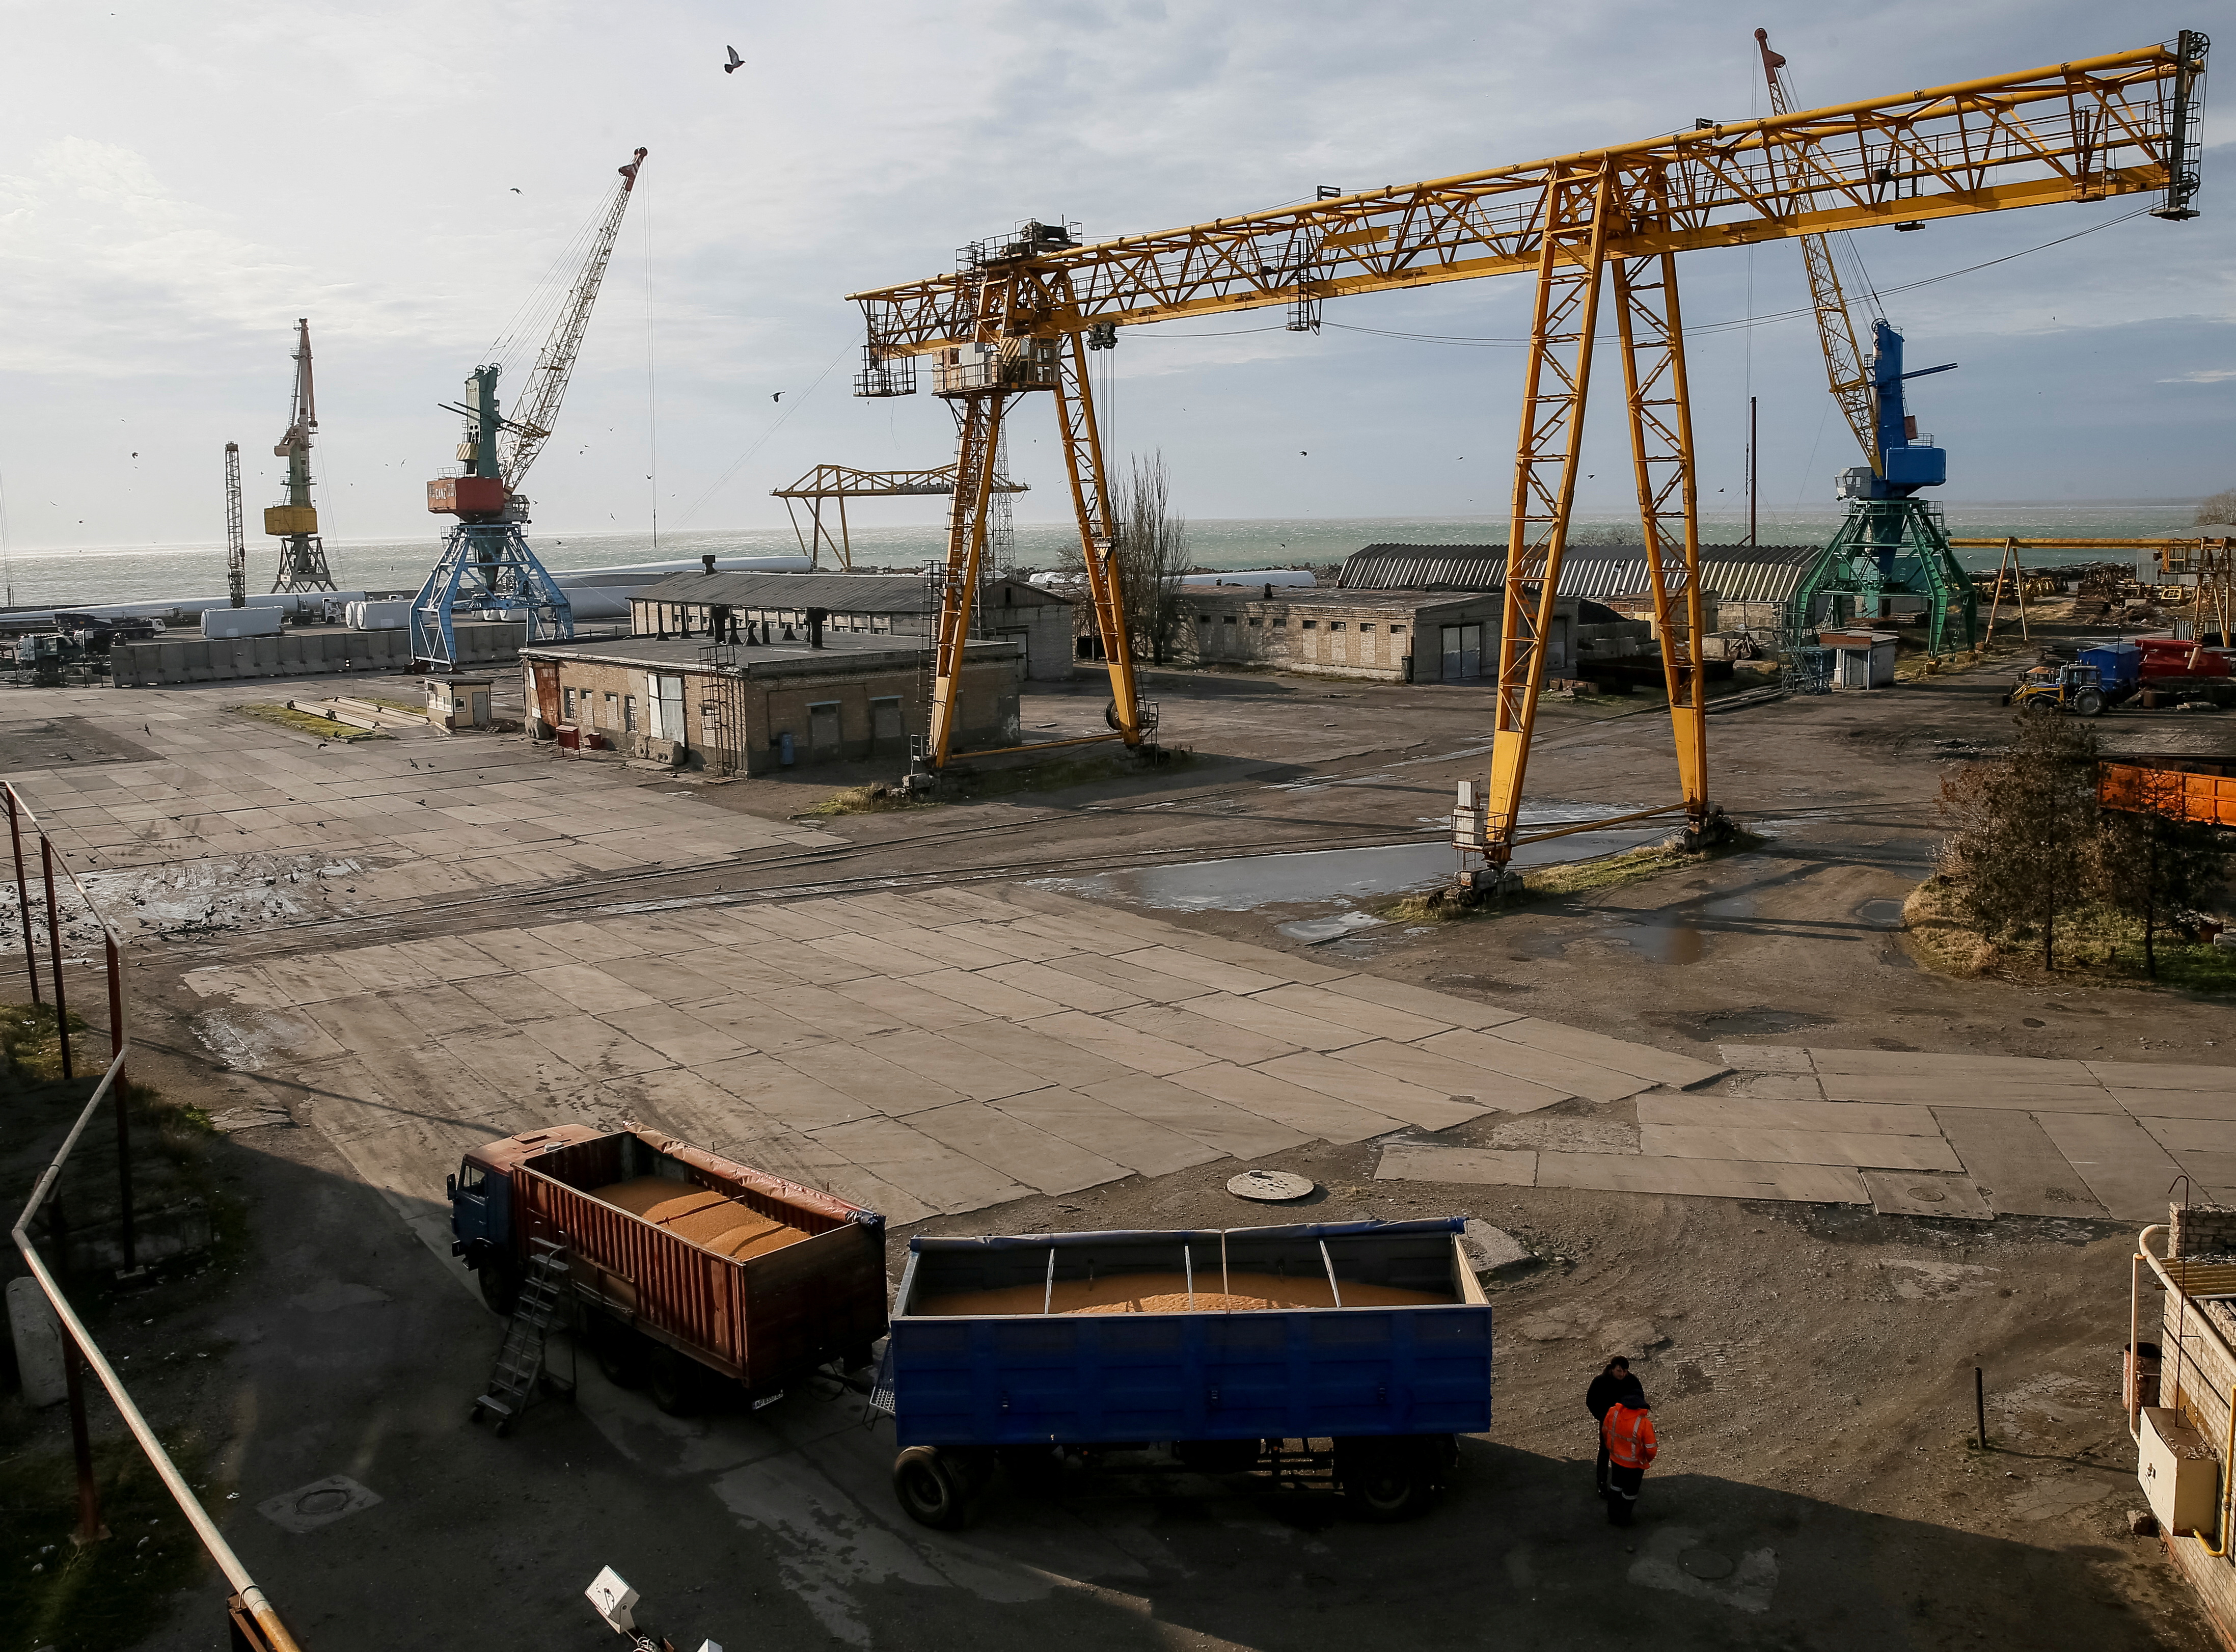 A truck with grain and cranes are seen in the Azov Sea port of Berdyansk